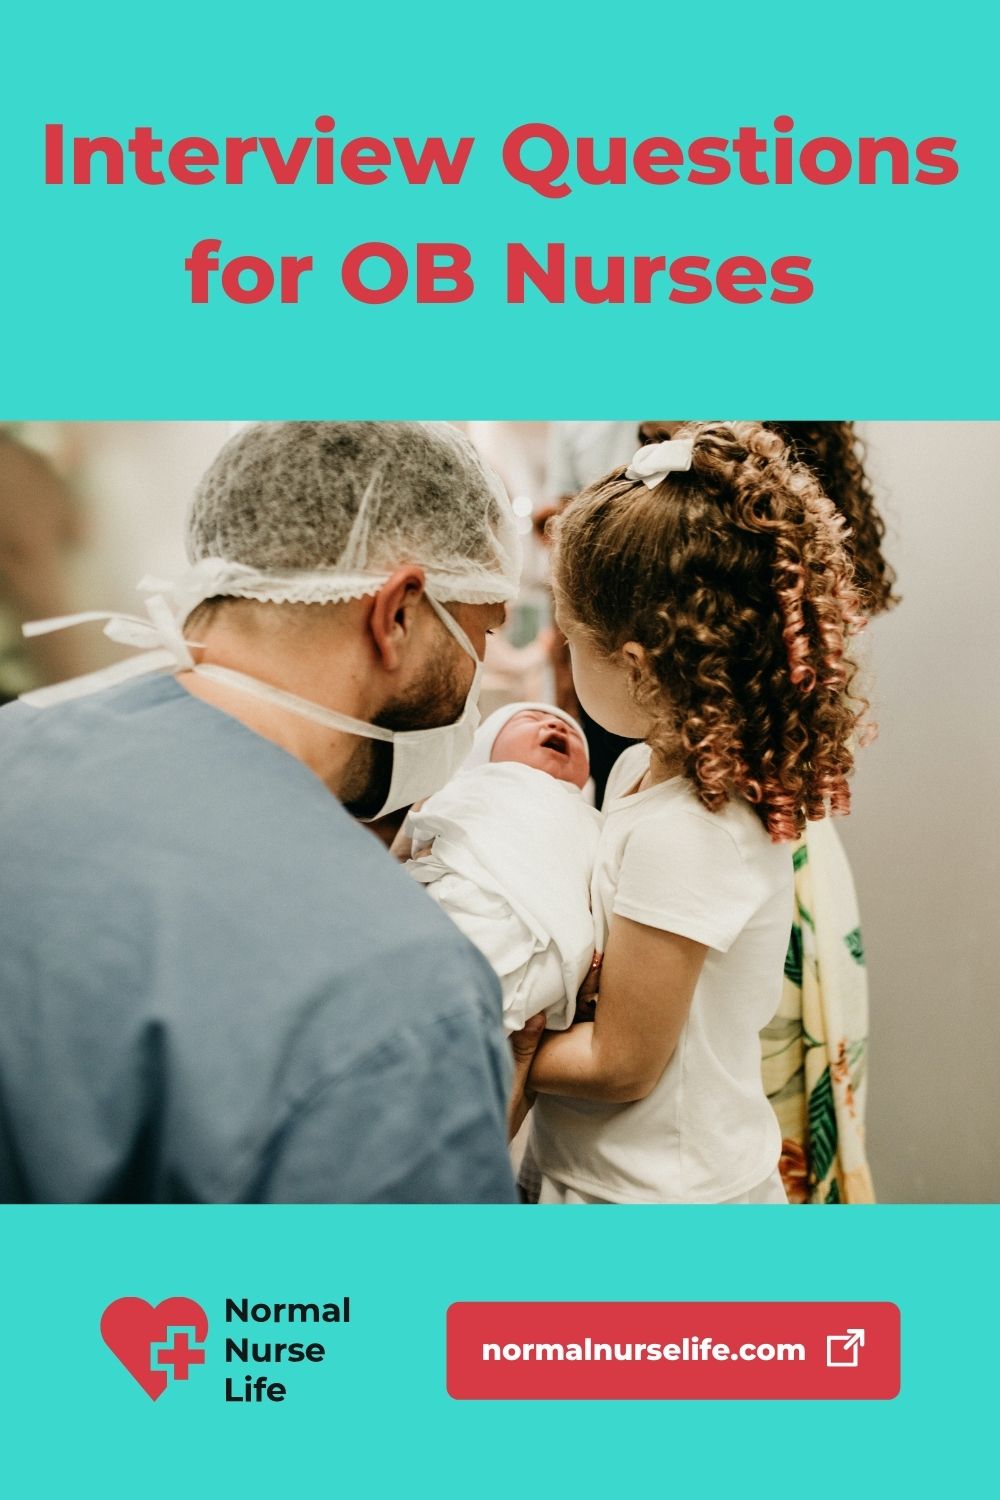 OB nurse interview questions and answers